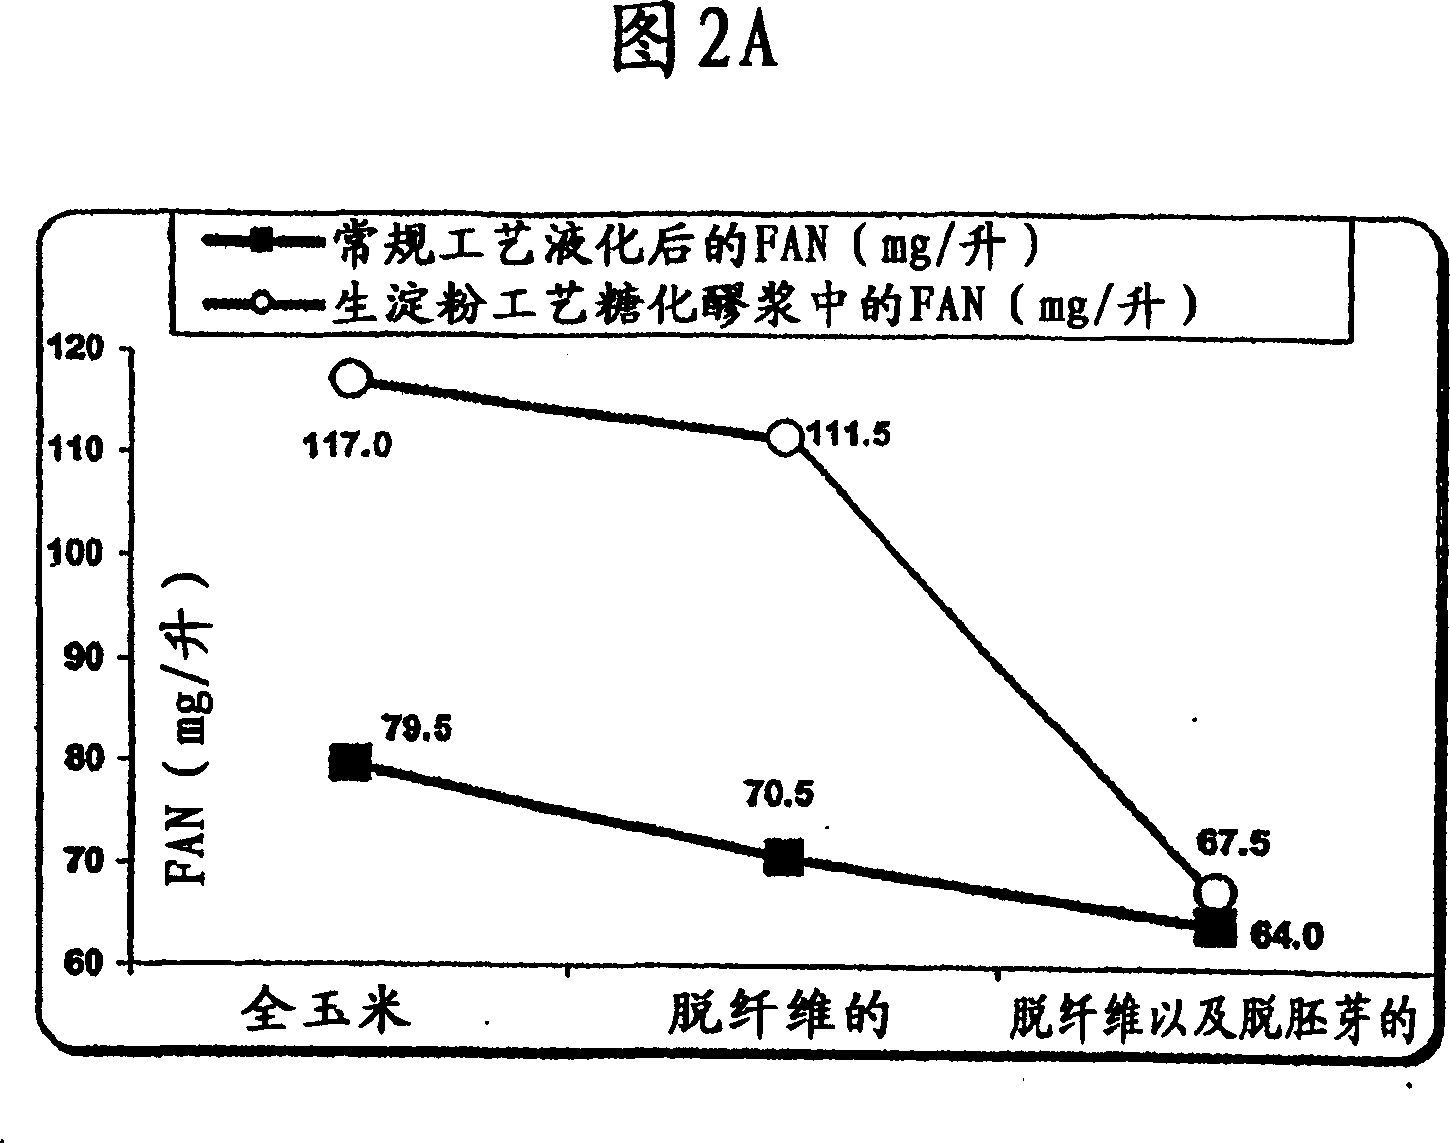 Methods and systems for producing ethanol using raw starch and fractionation